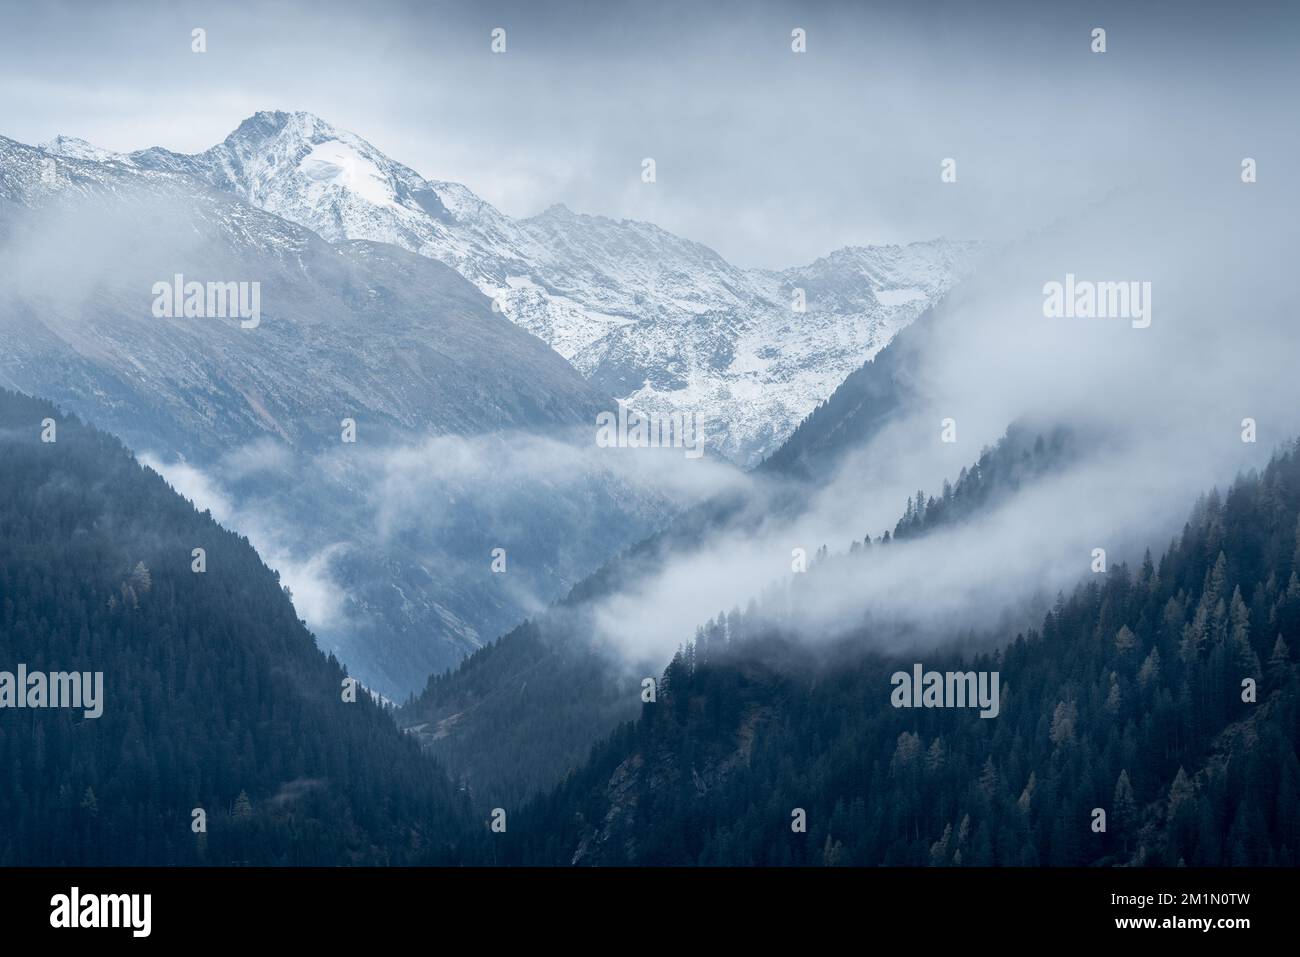 Dreiherrnspitze, Picco dei Tre Signori mountain in the back with dramatic mountain slopes on a cloudy and rainy day in Austrian-Italian Alps. Snow and Stock Photo